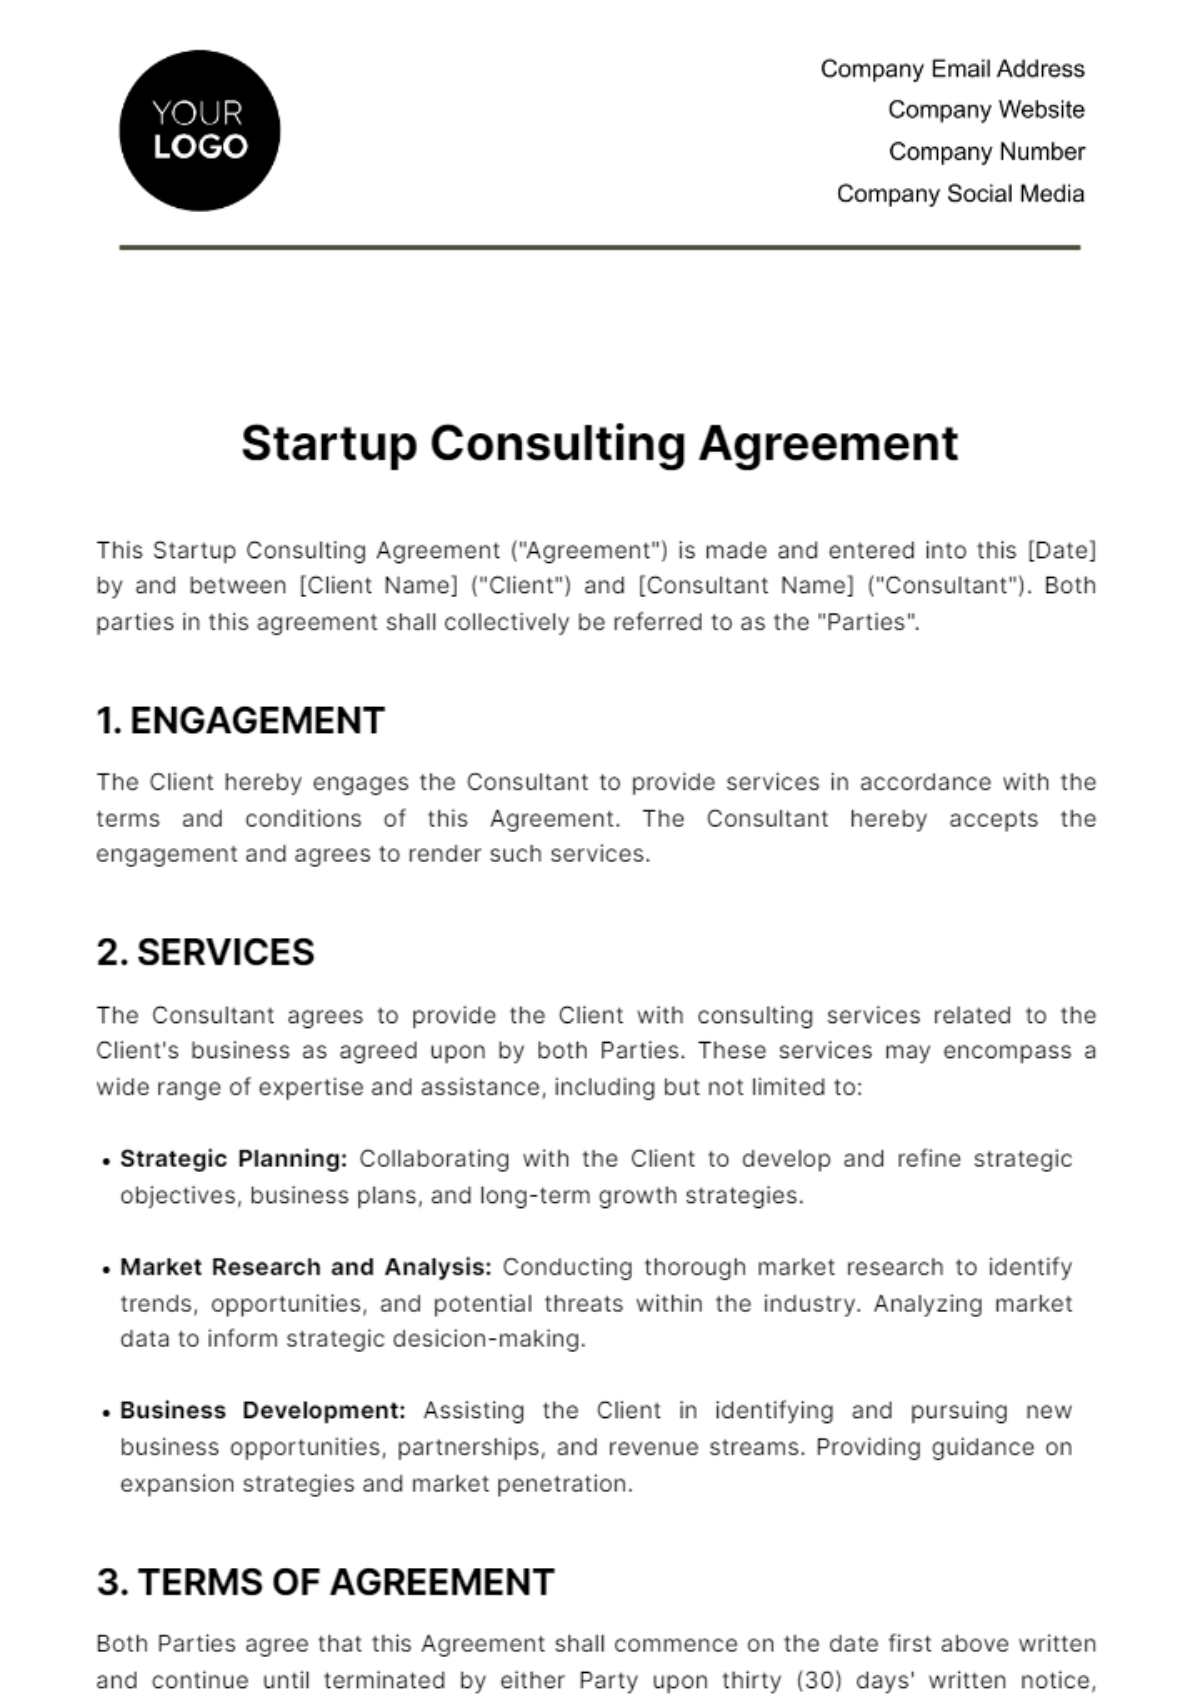 Startup Consulting Agreement Template